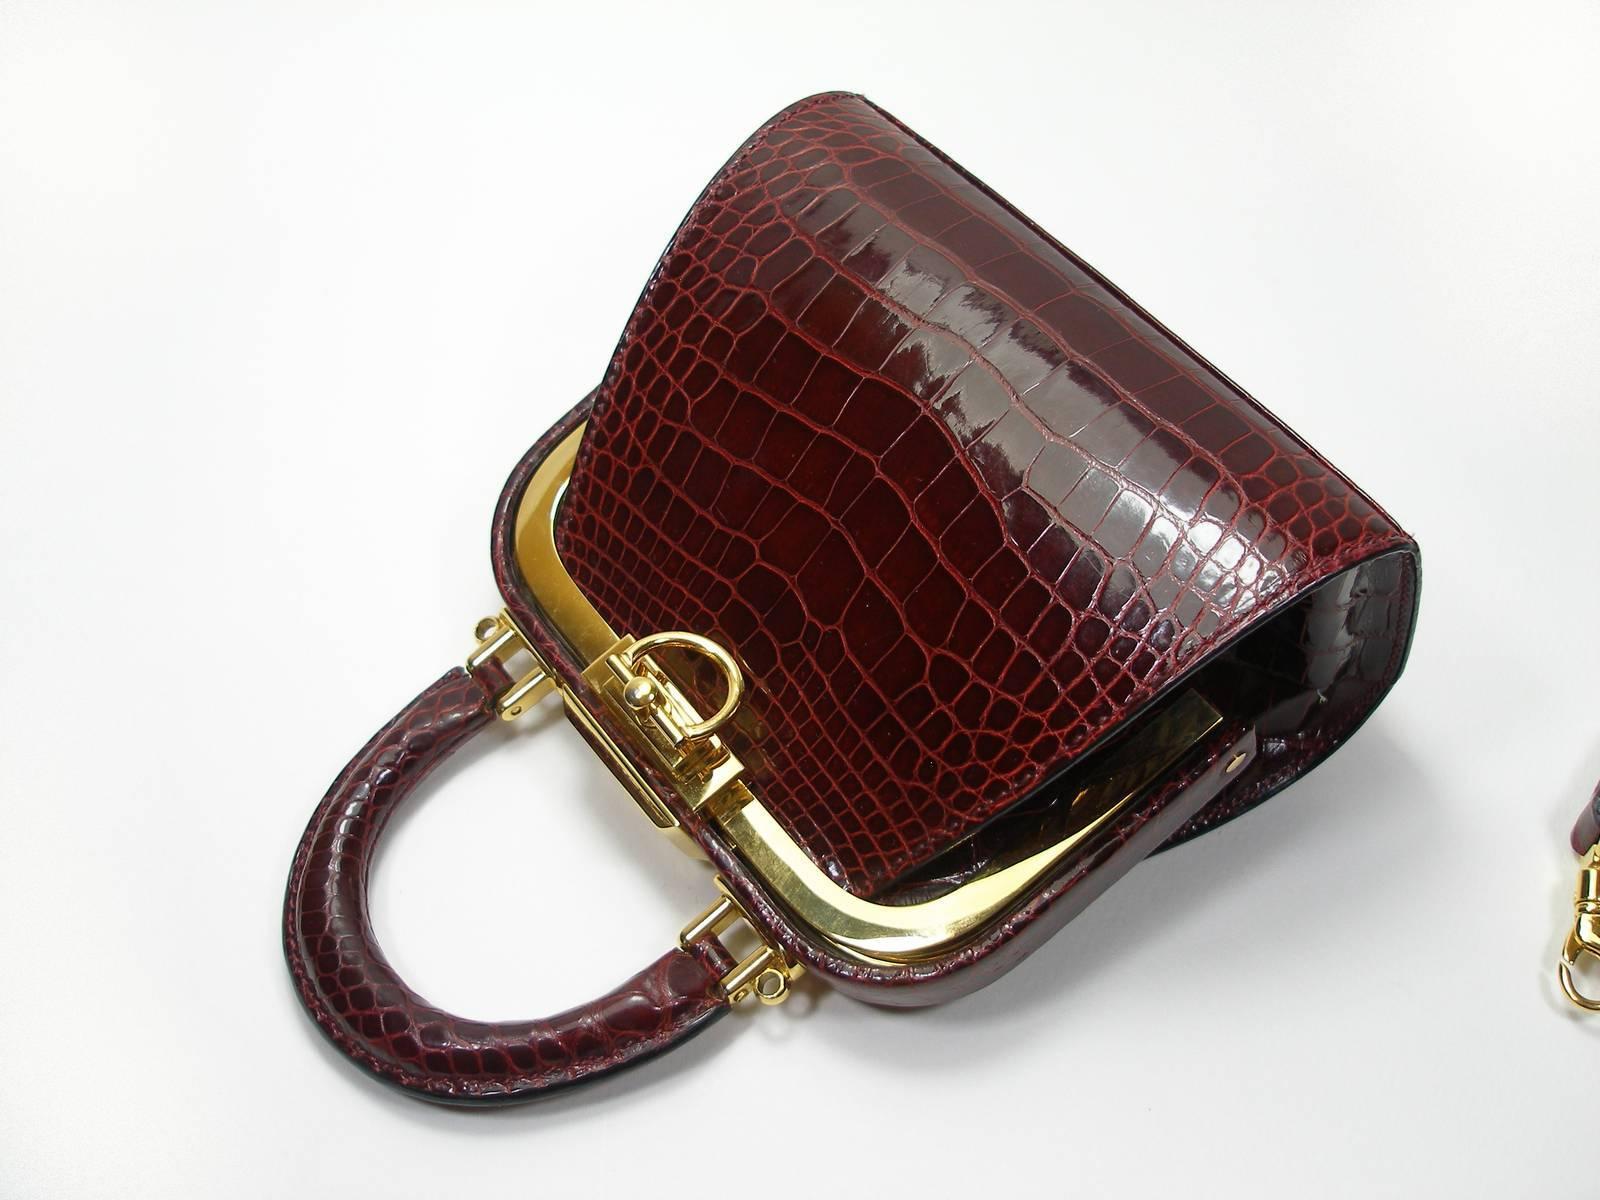 Christian Dior Vintage Rare Doctor Style Micro Handbag in Alligator Leather For Sale 5